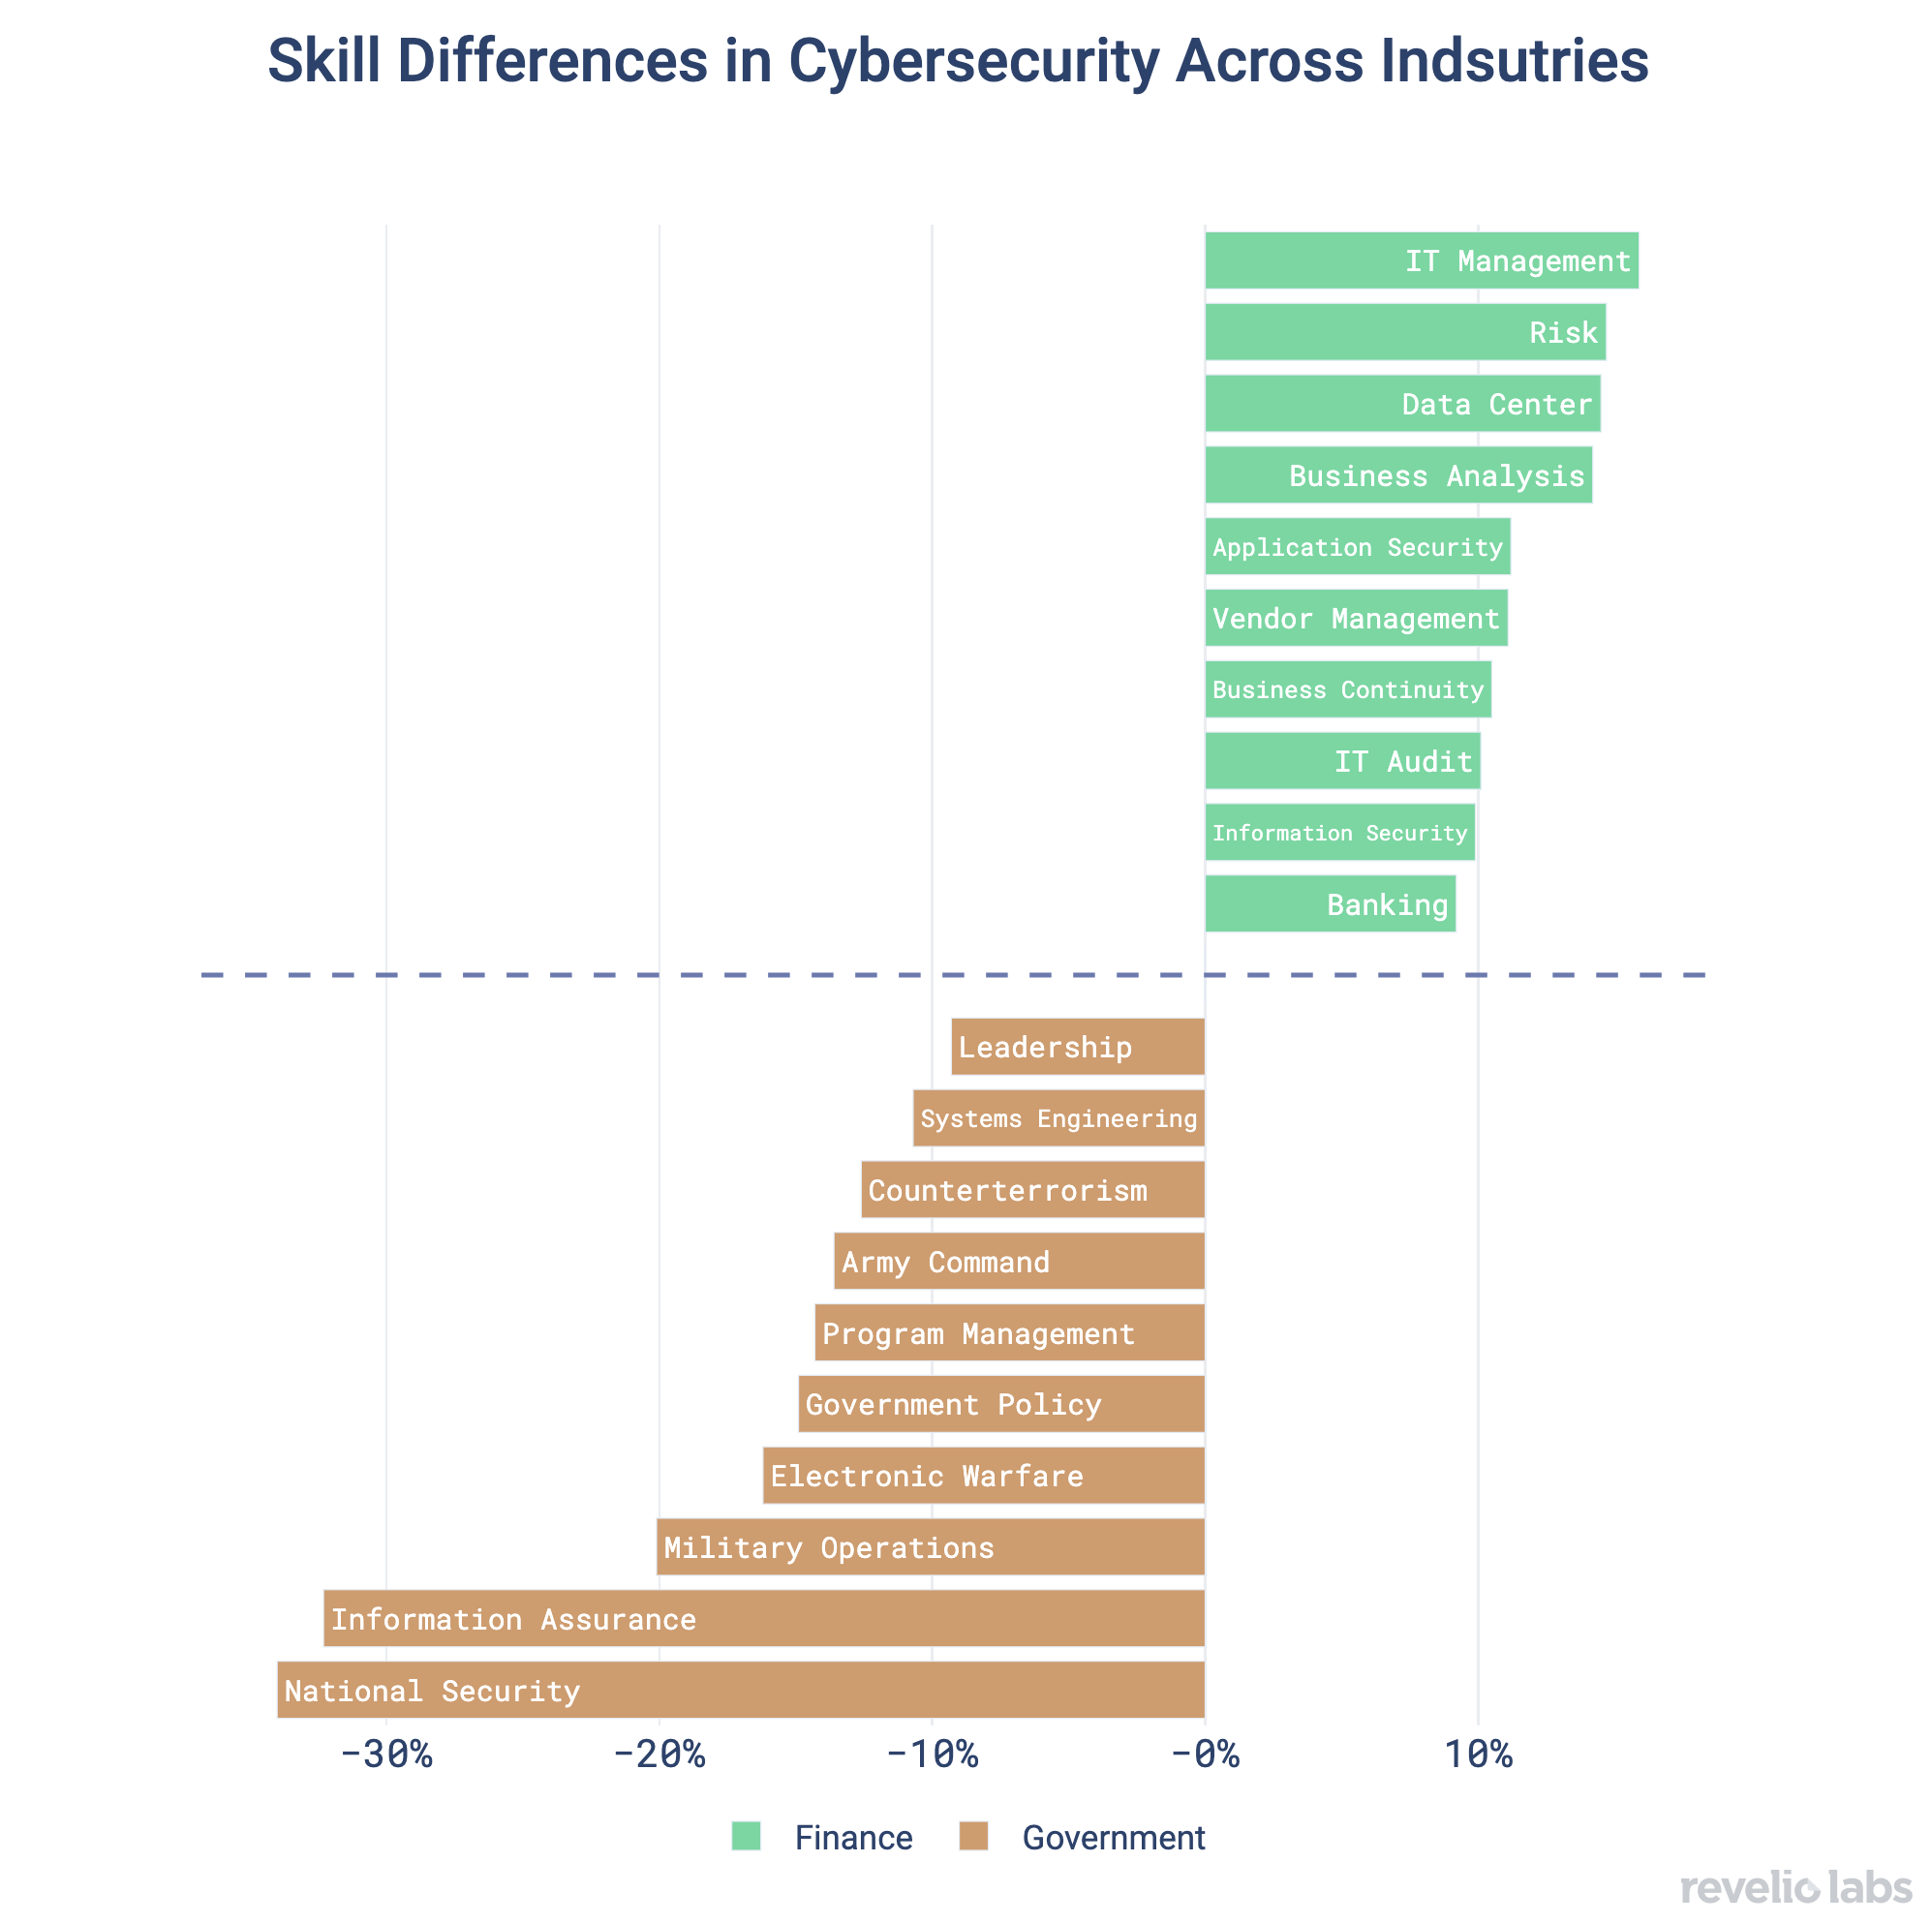 Skill Differences in Cybersecurity Across Industries